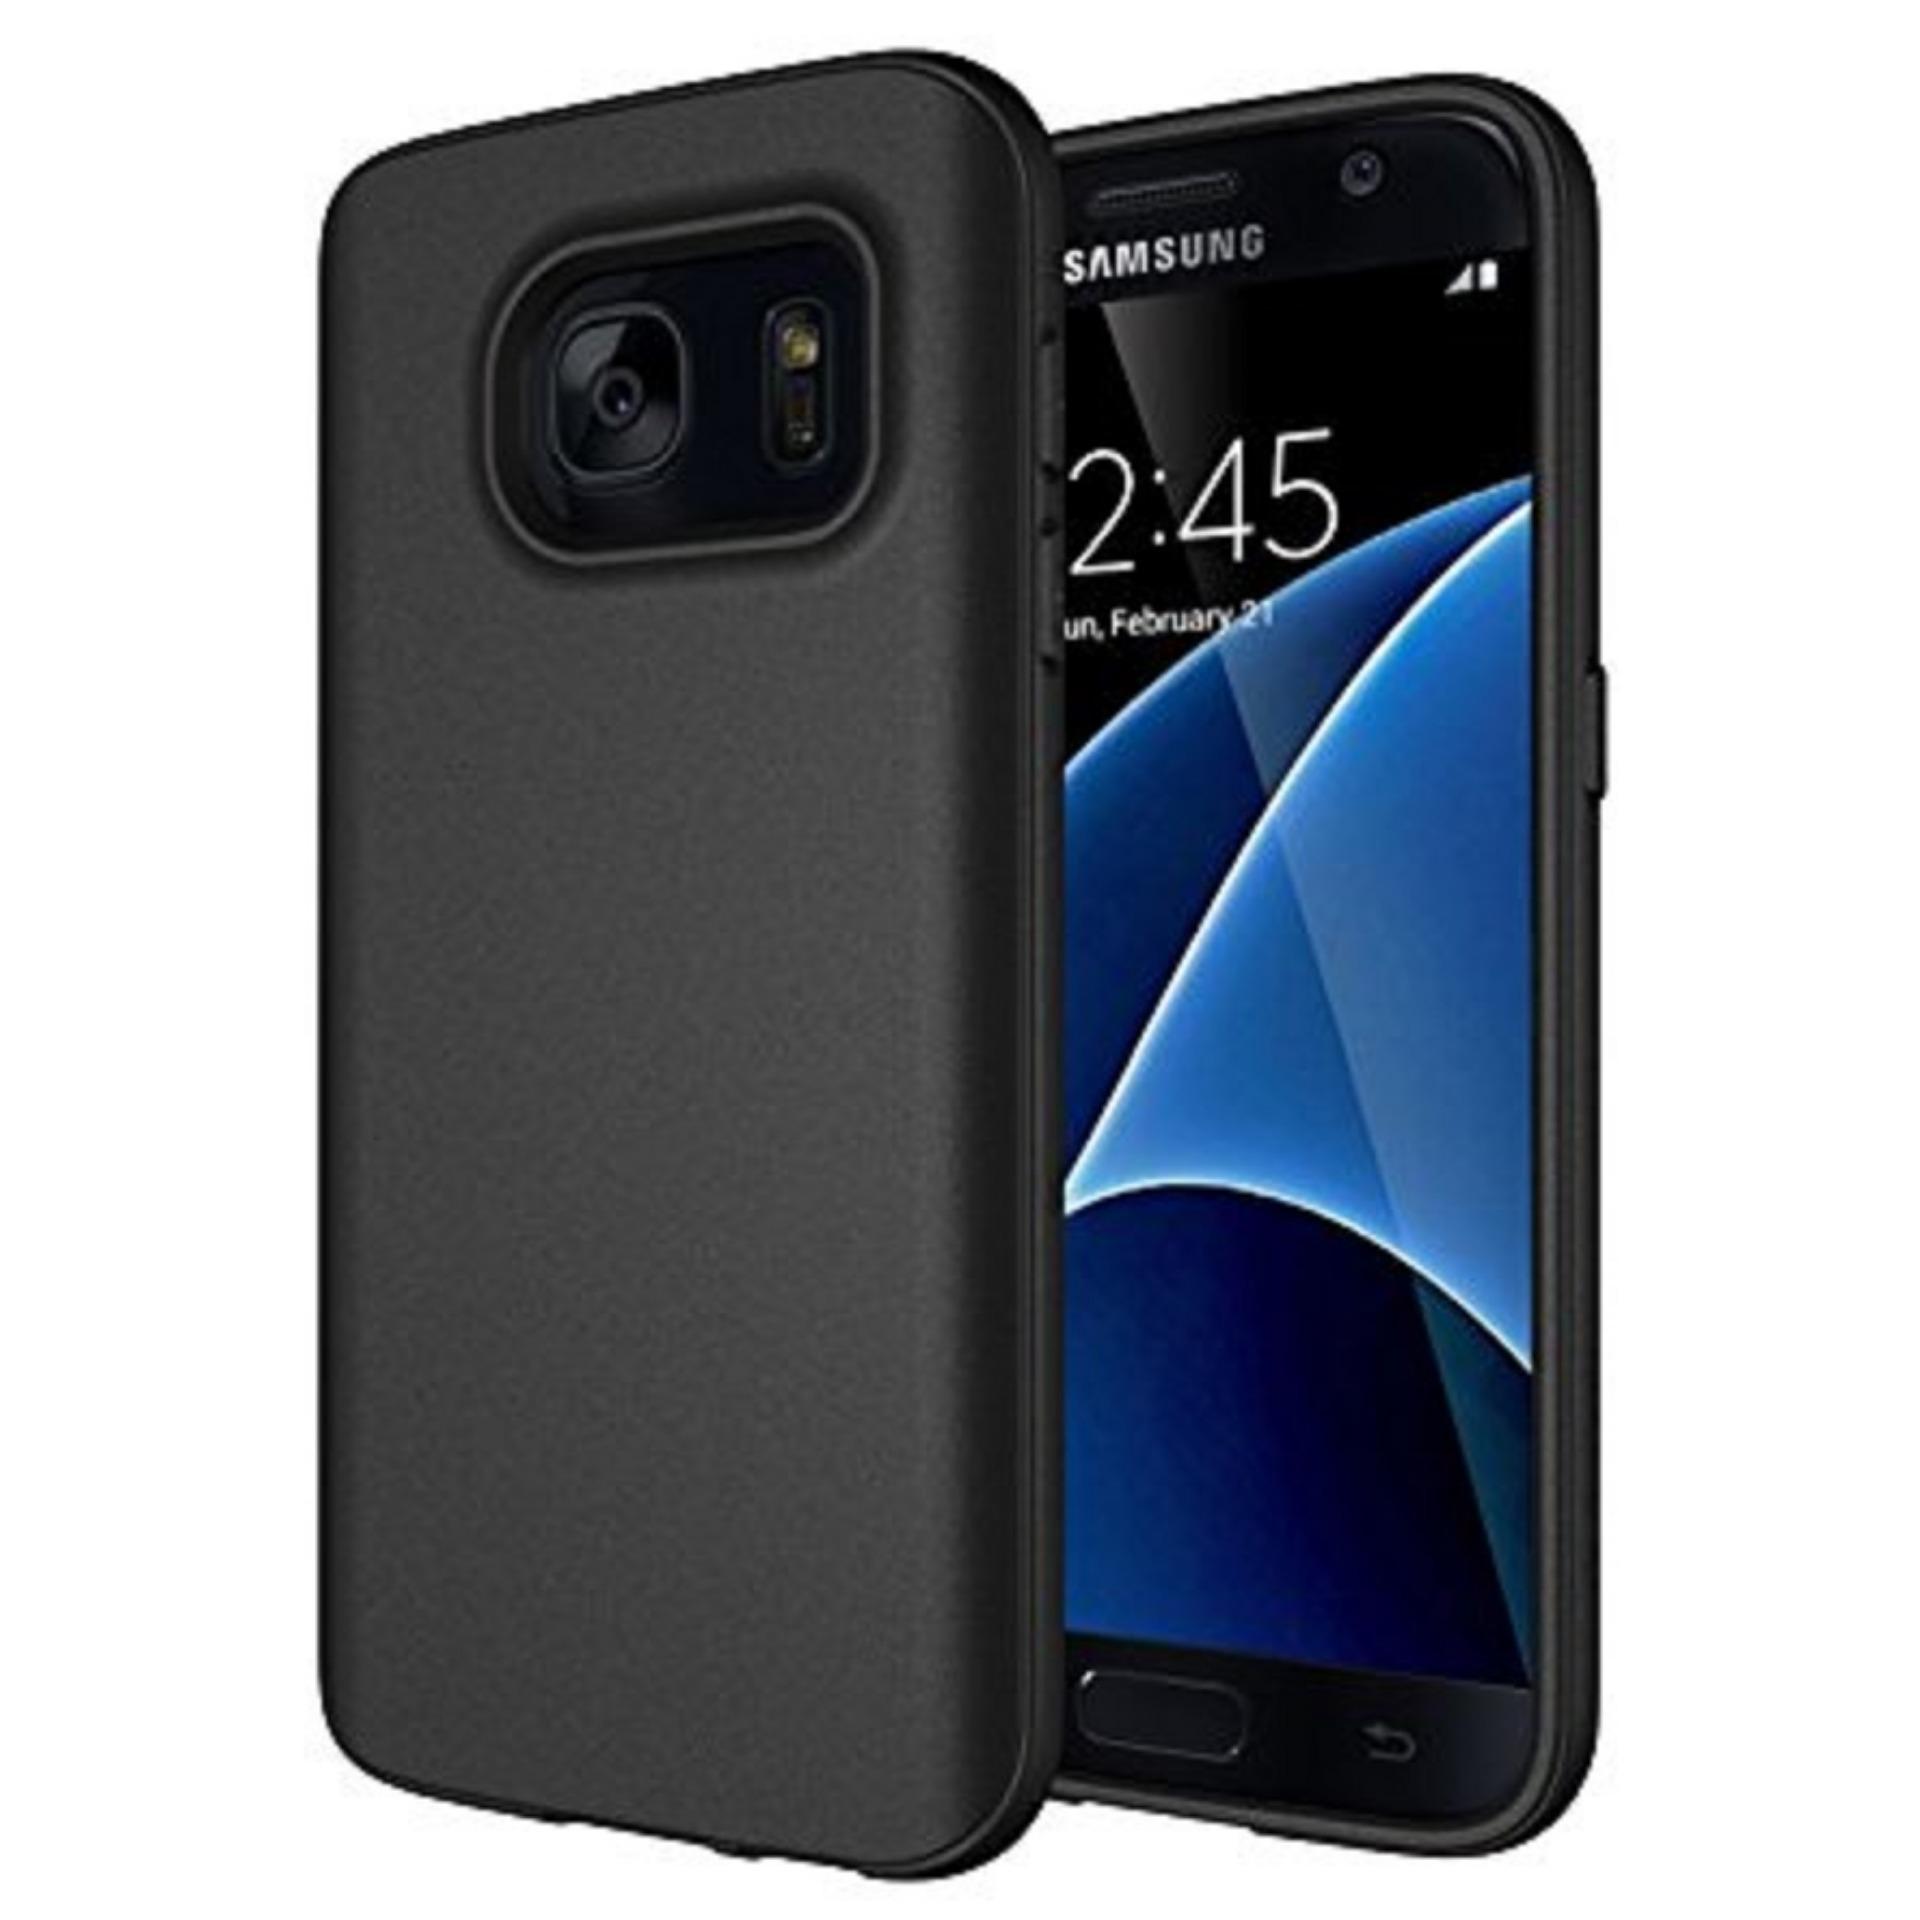 Review Darknight For Samsung Galaxy Grand Prime G530 Plus 